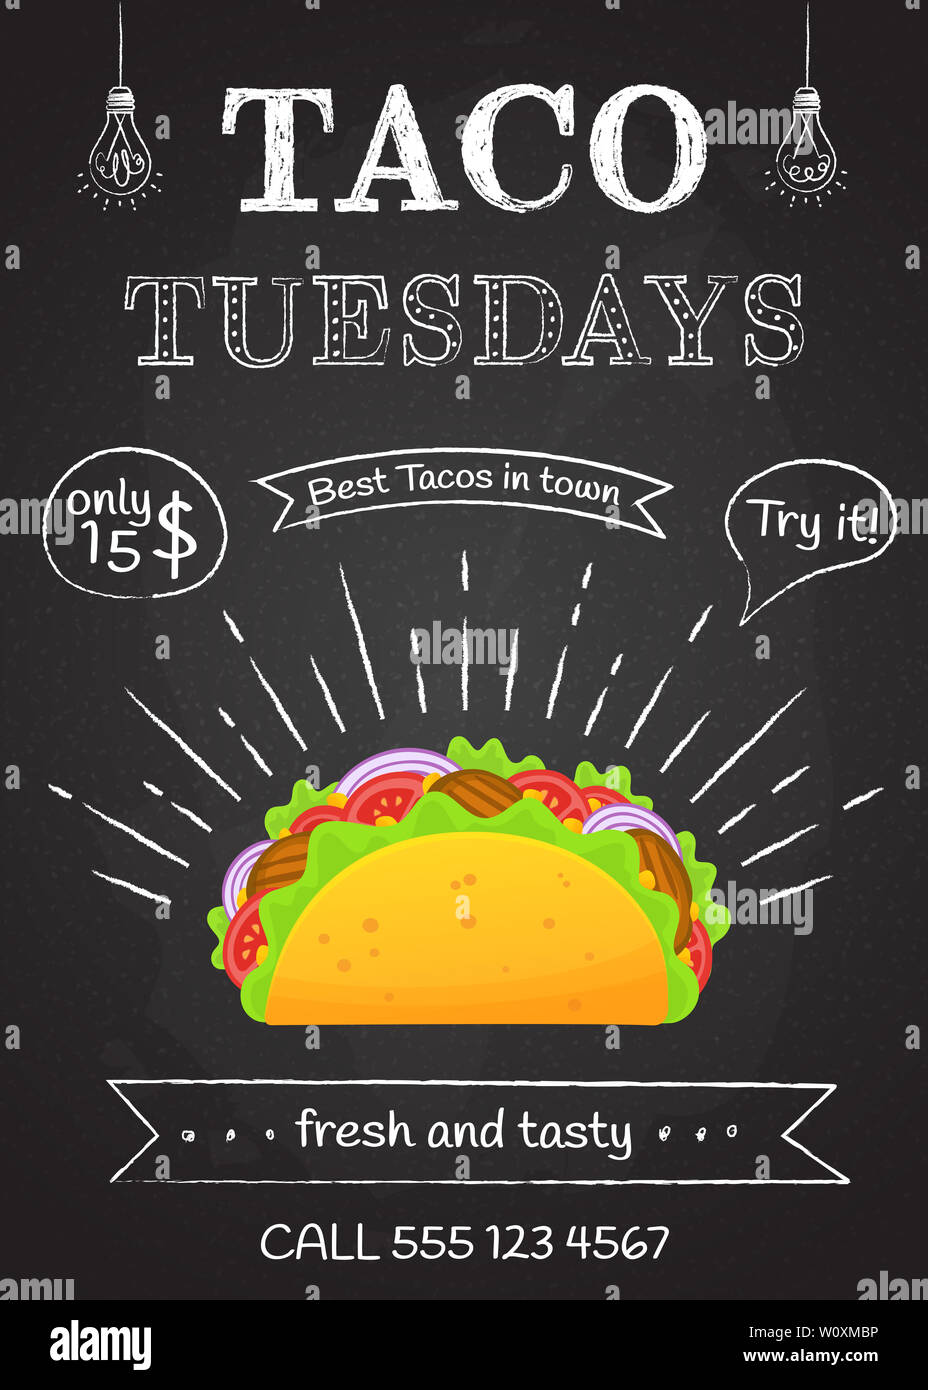 Traditional mexican fastfood taco tuesday poster. Tasty beef meat, salad,  tomato in delicious tacos with vintage chalk decoration and sign Taco  Tuesday. illustration for food truck design Stock Photo - Alamy